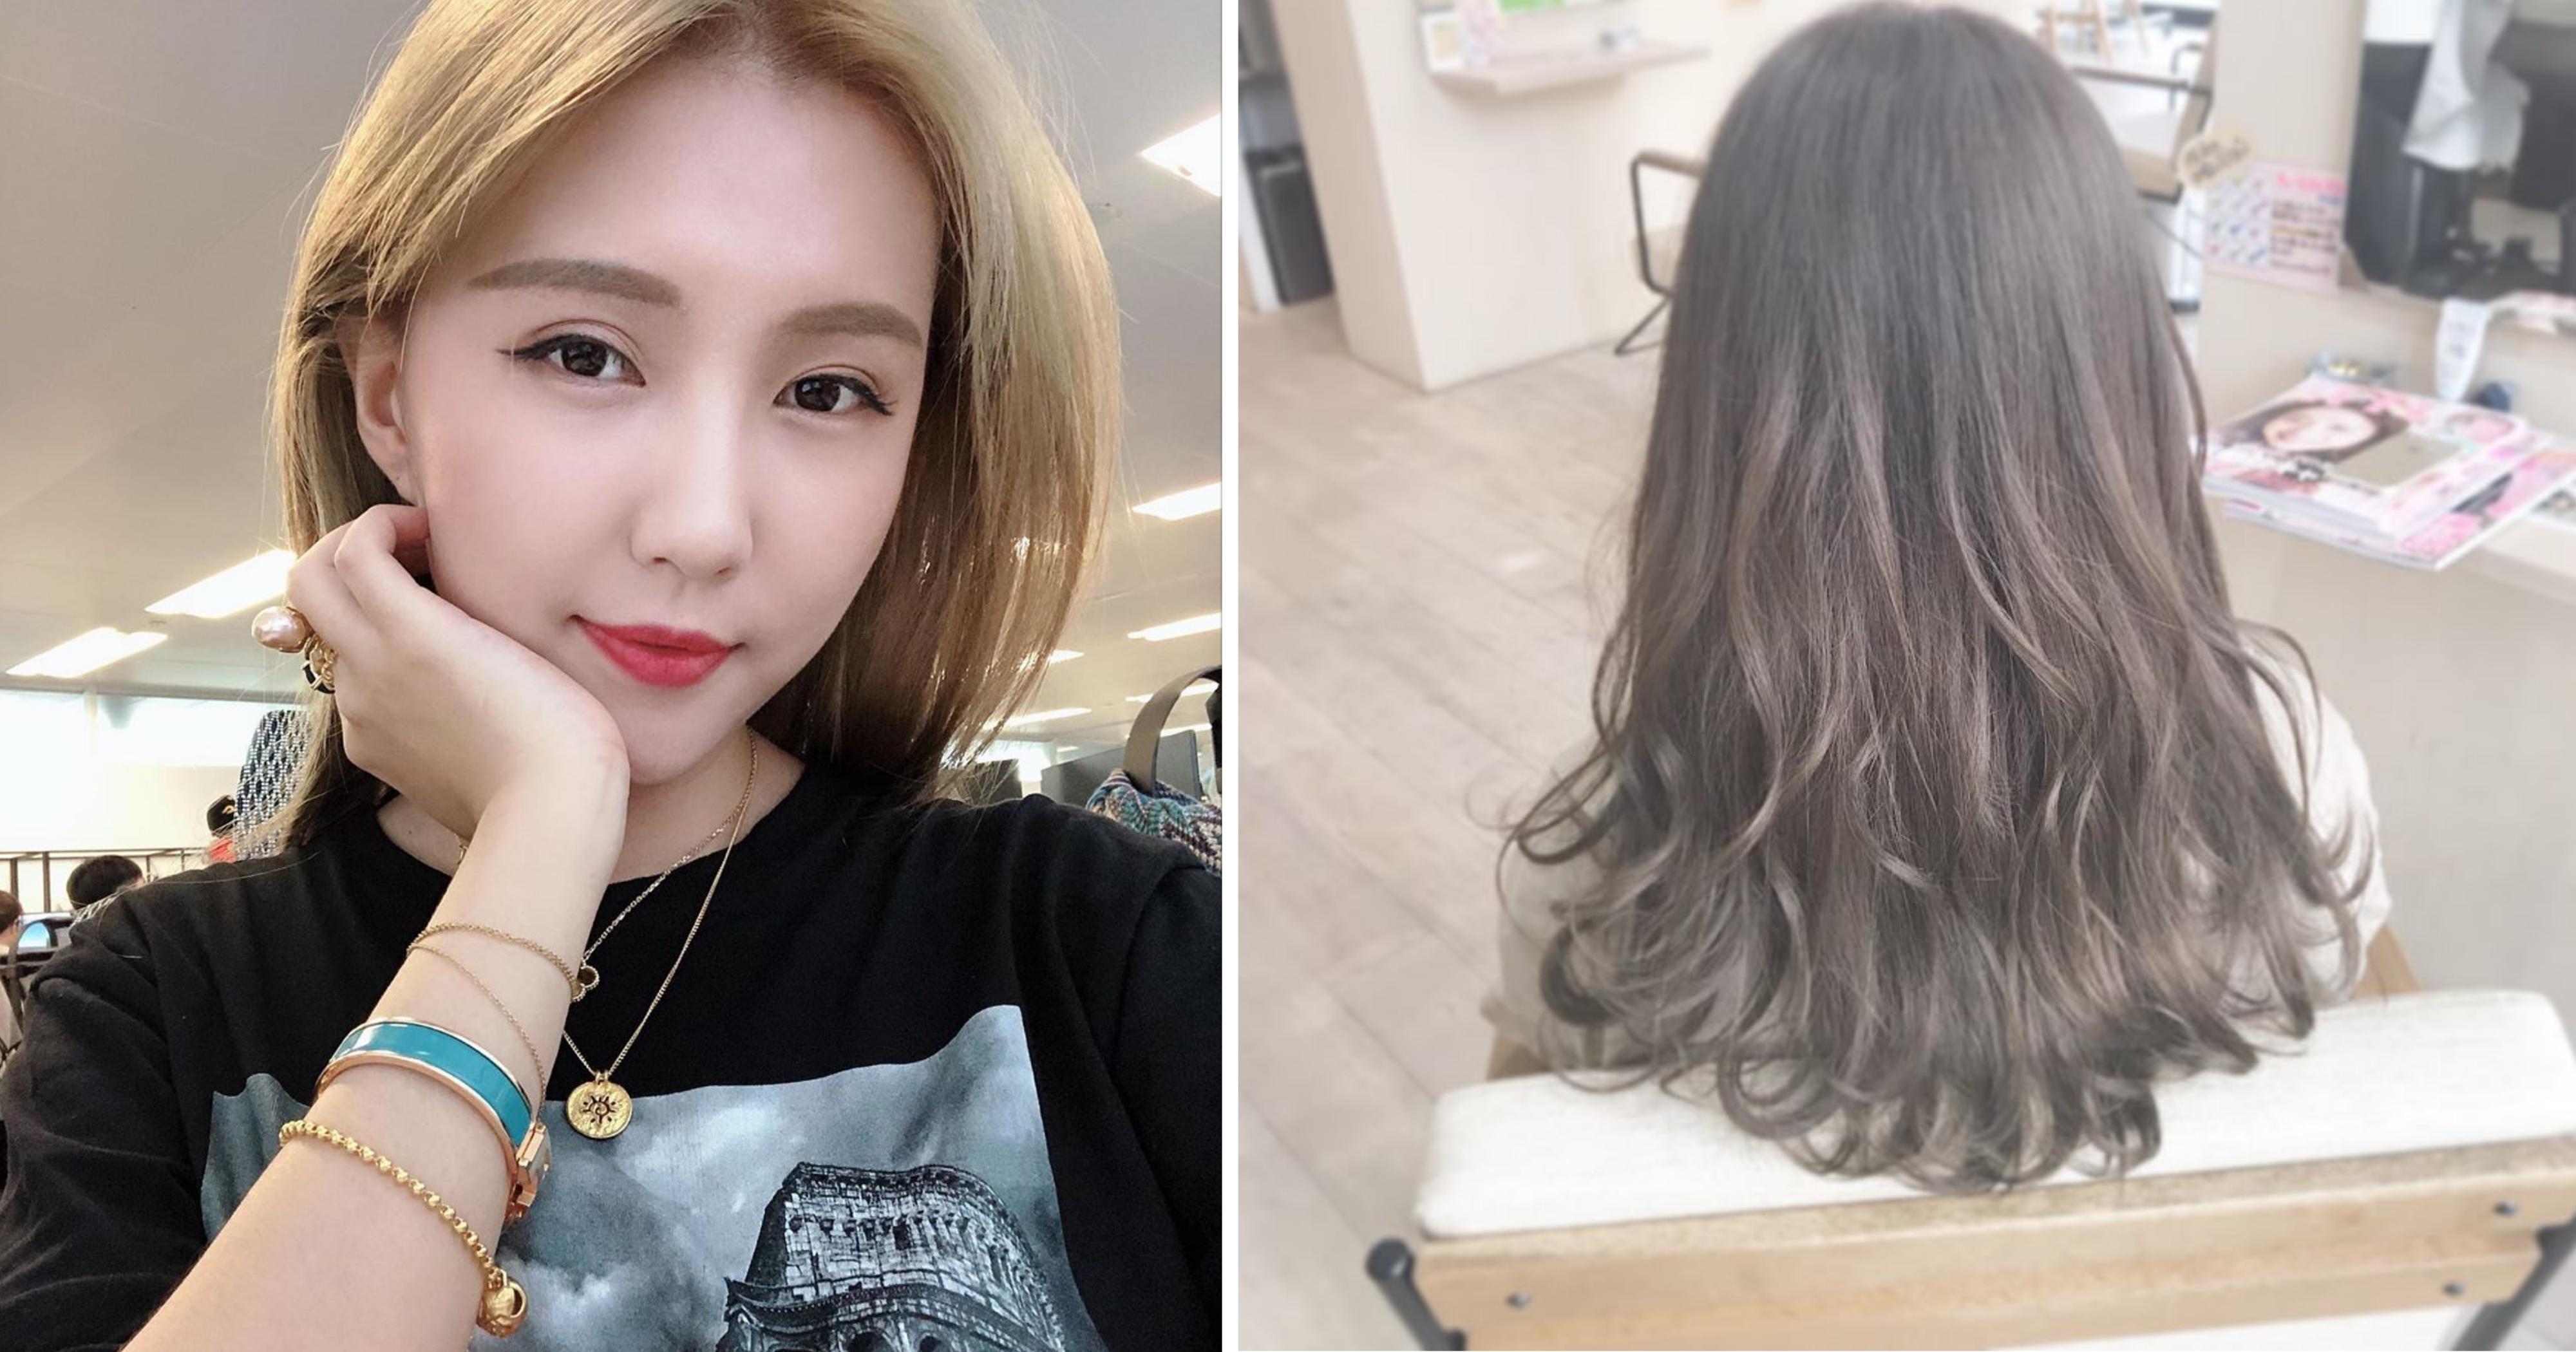 Milk tea hair is the latest hair colour trend sweeping Asia - Mothership.SG  - News from Singapore, Asia and around the world